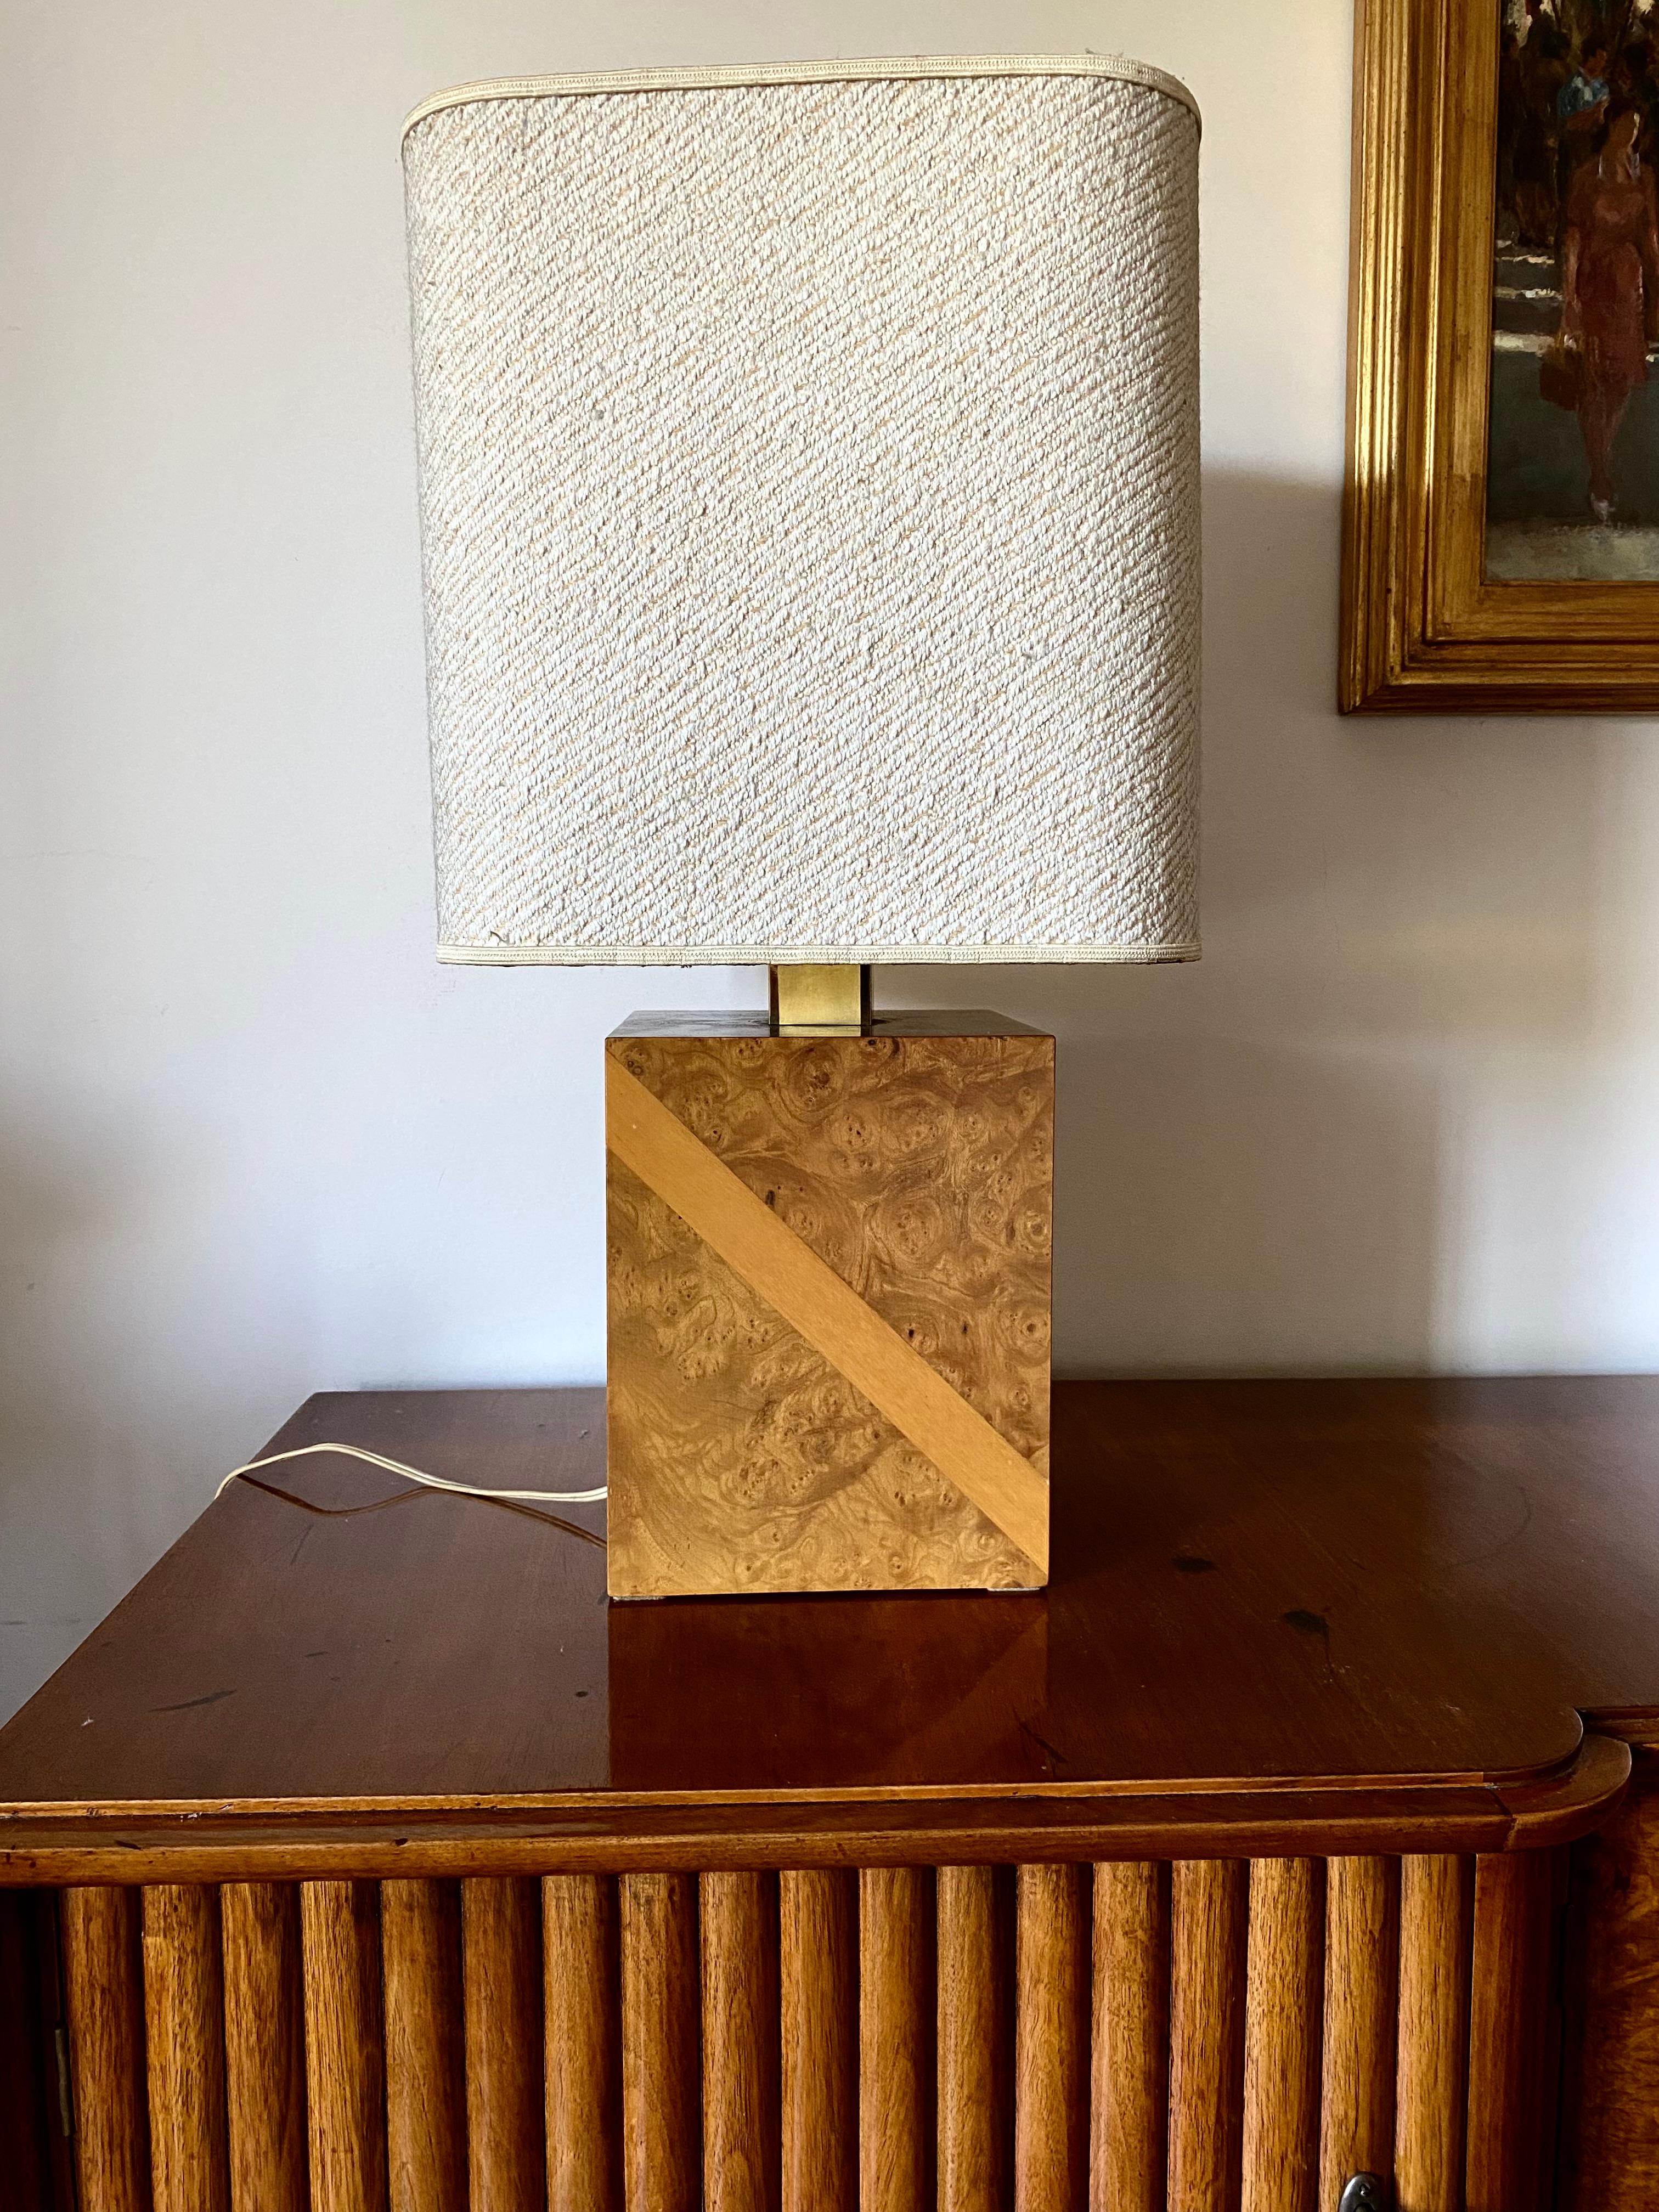 Hollywood regency style. Italian manufacture wood and brass table lamp.

Fabric lampshade included.

Italy 1970s

Measures: 62.5 cm H x 34 cm with lampshade

Base: 42 H x 20 cm

Conditions: very good consistent with age and use.